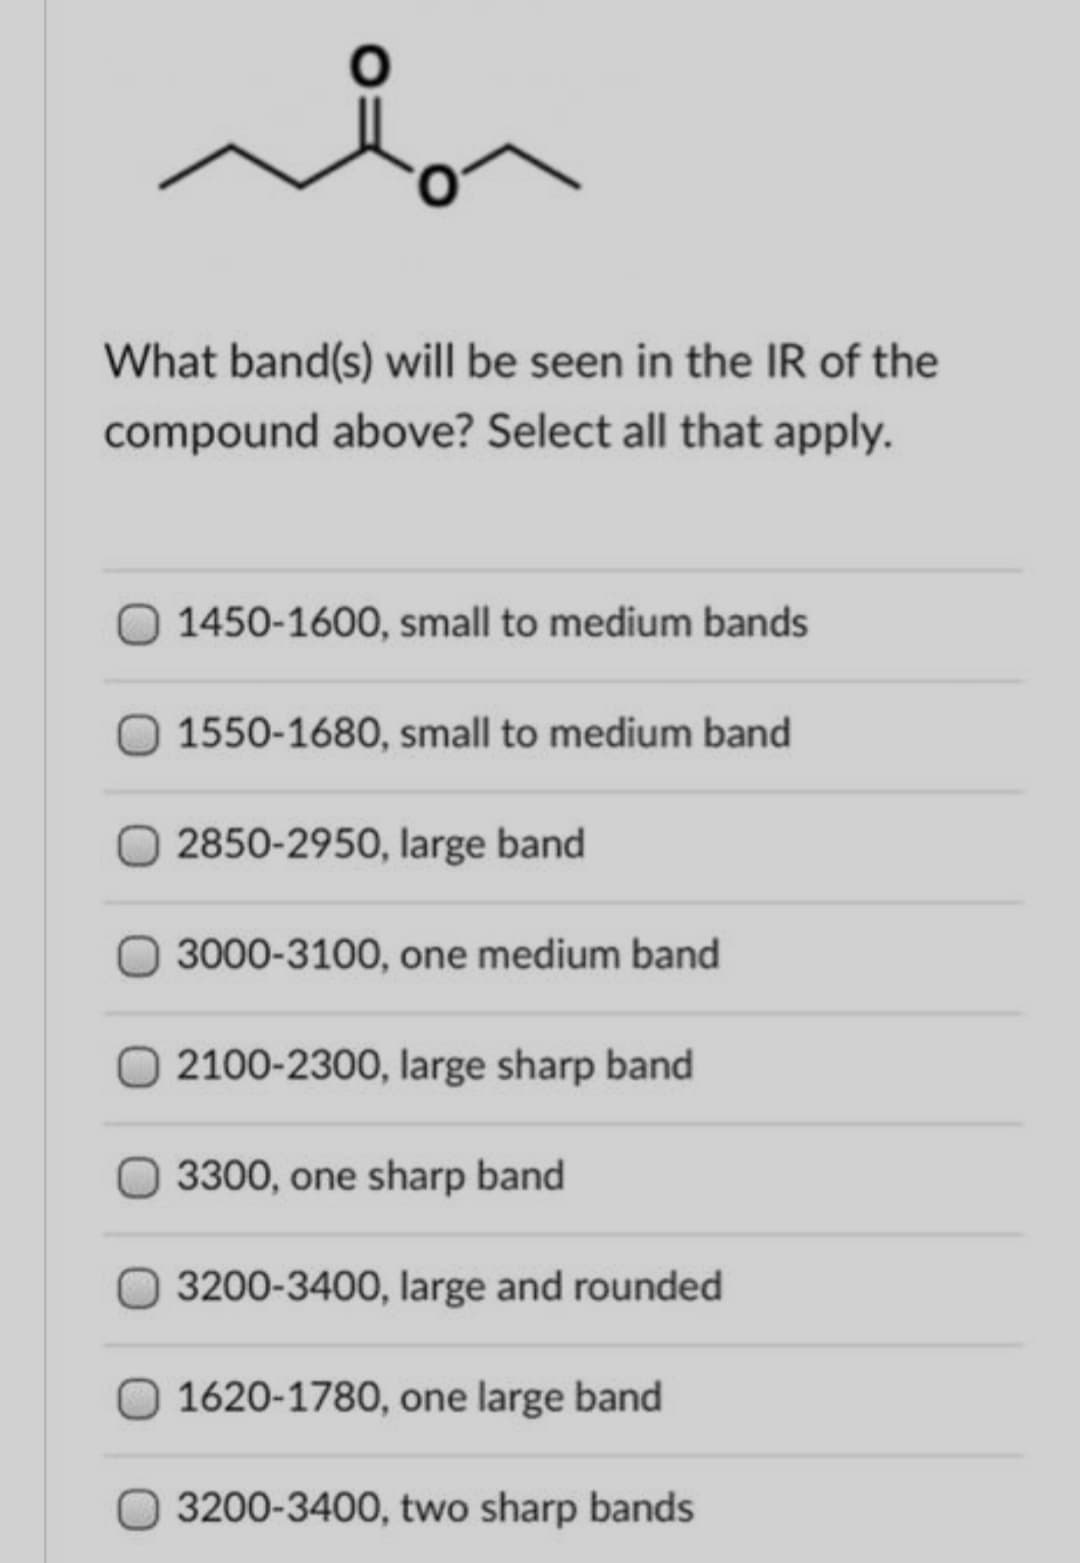 What band(s) will be seen in the IR of the
compound above? Select all that apply.
1450-1600, small to medium bands
O 1550-1680, small to medium band
2850-2950, large band
3000-3100, one medium band
O 2100-2300, large sharp band
3300, one sharp band
3200-3400, large and rounded
O 1620-1780, one large band
3200-3400, two sharp bands
